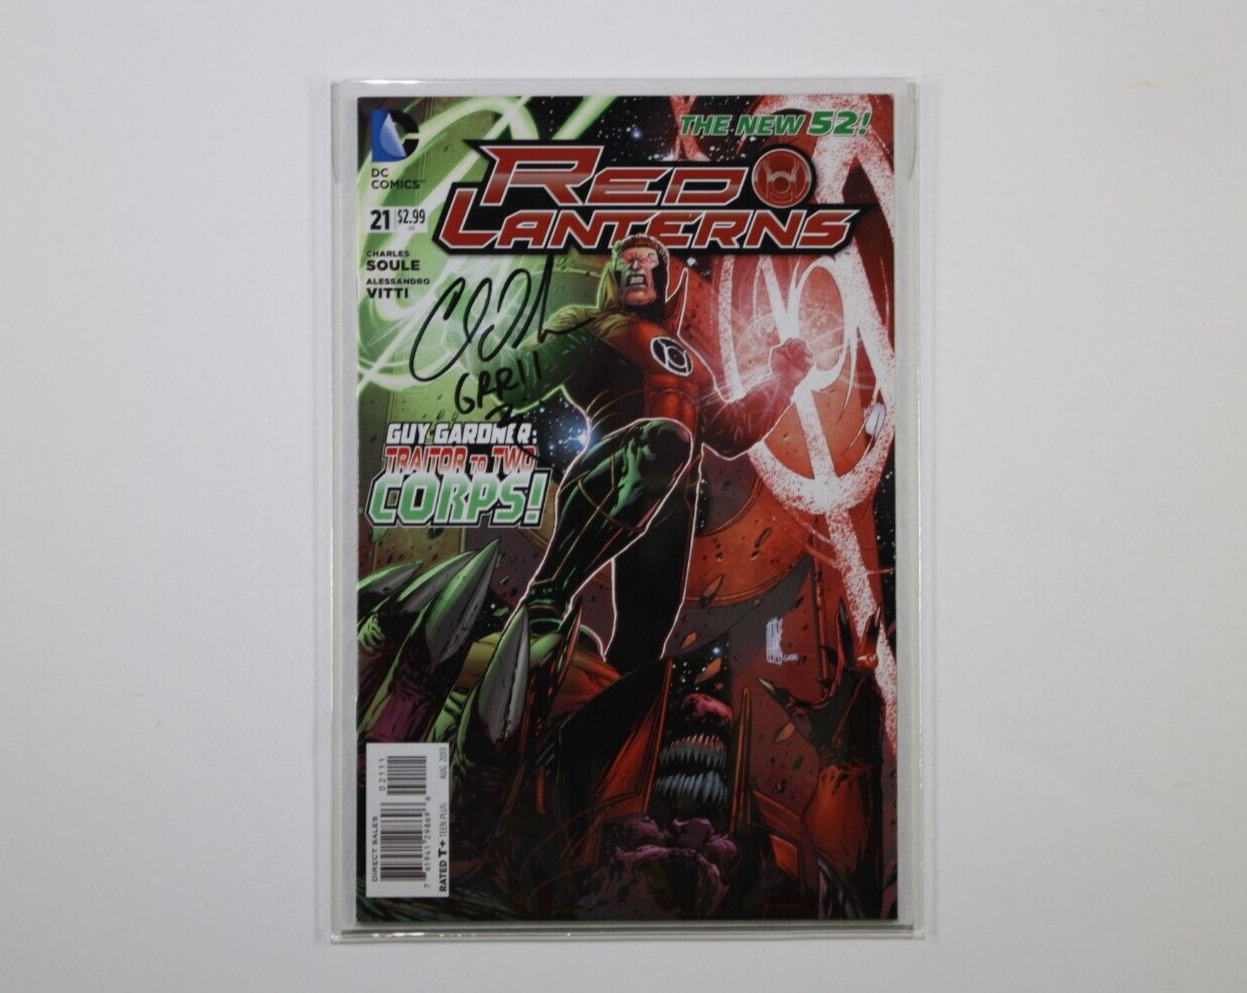 New 52 RED LANTERS #21 signed by Charles Soule 2011 DC Comics